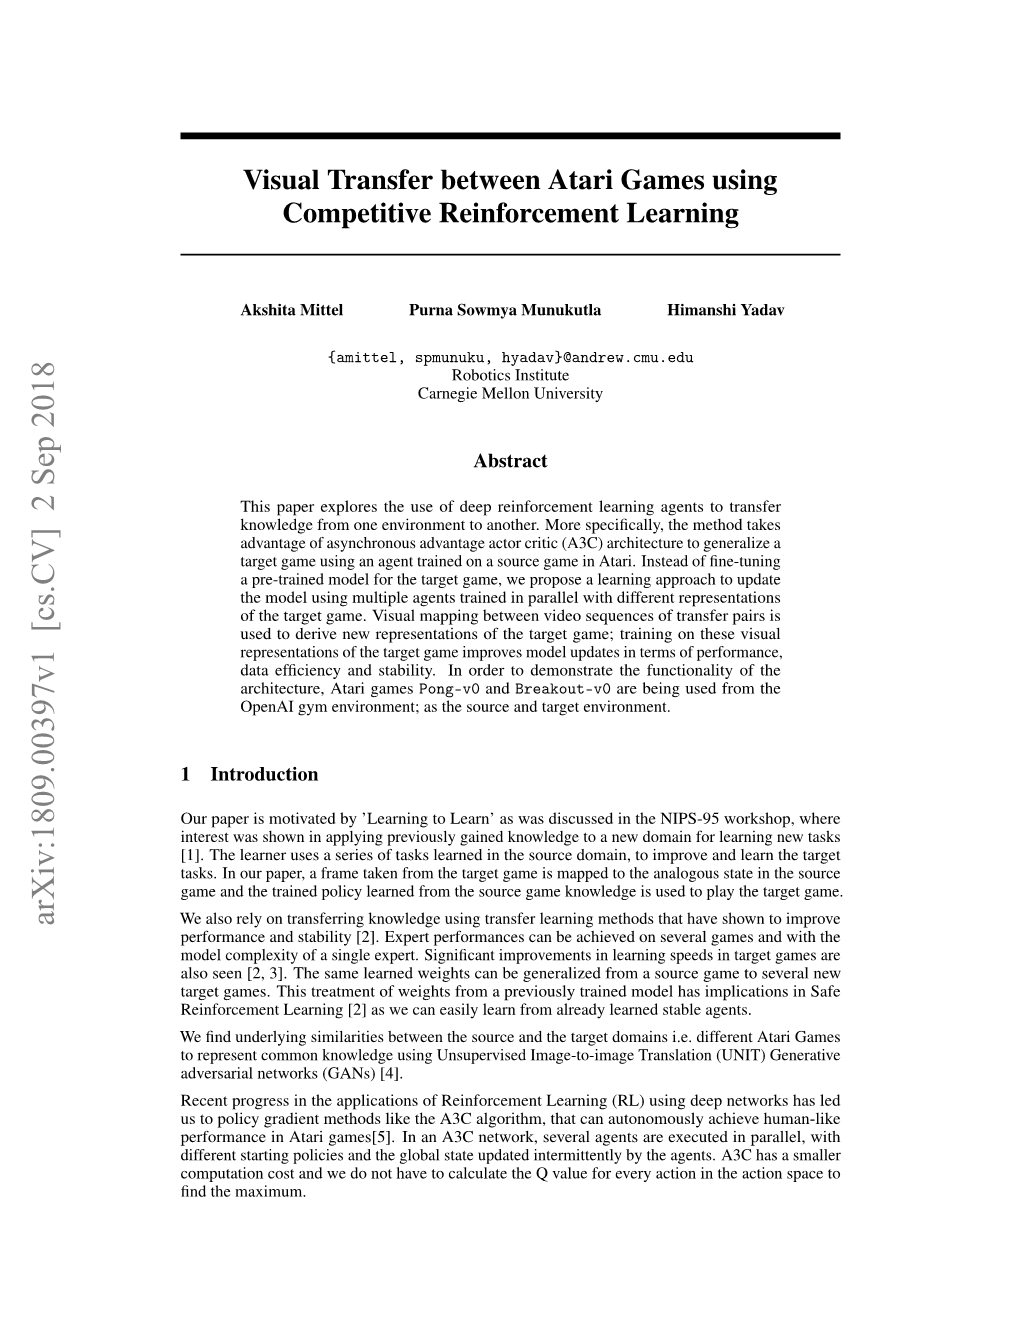 Visual Transfer Between Atari Games Using Competitive Reinforcement Learning